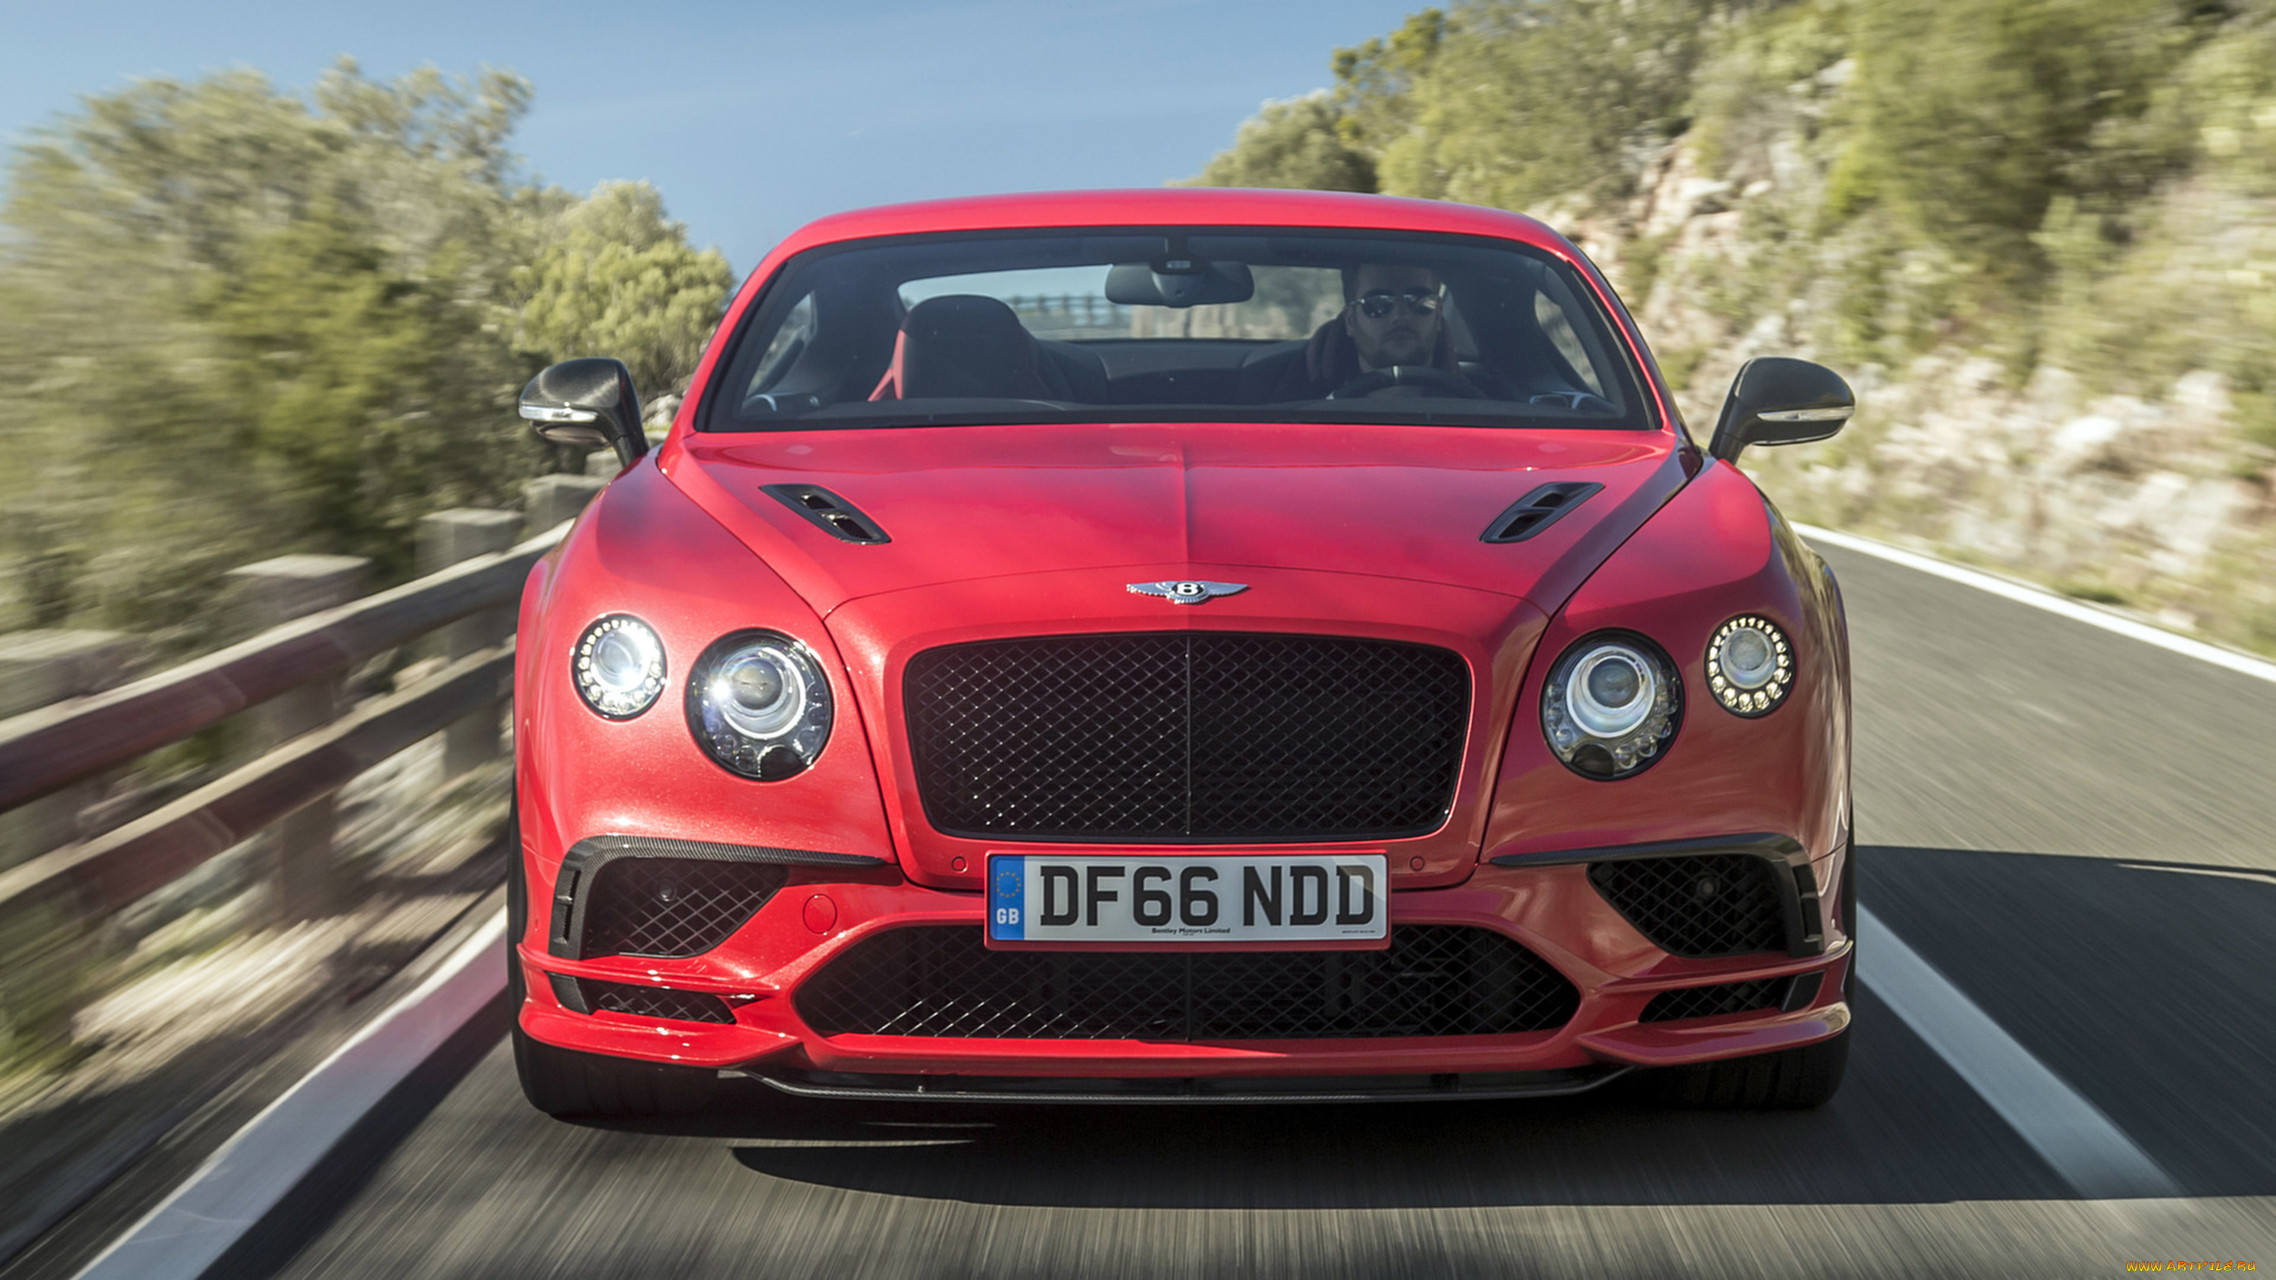 bentley continental gt supersports coupe 2018, , bentley, coupe, gt, supersports, continental, 2018